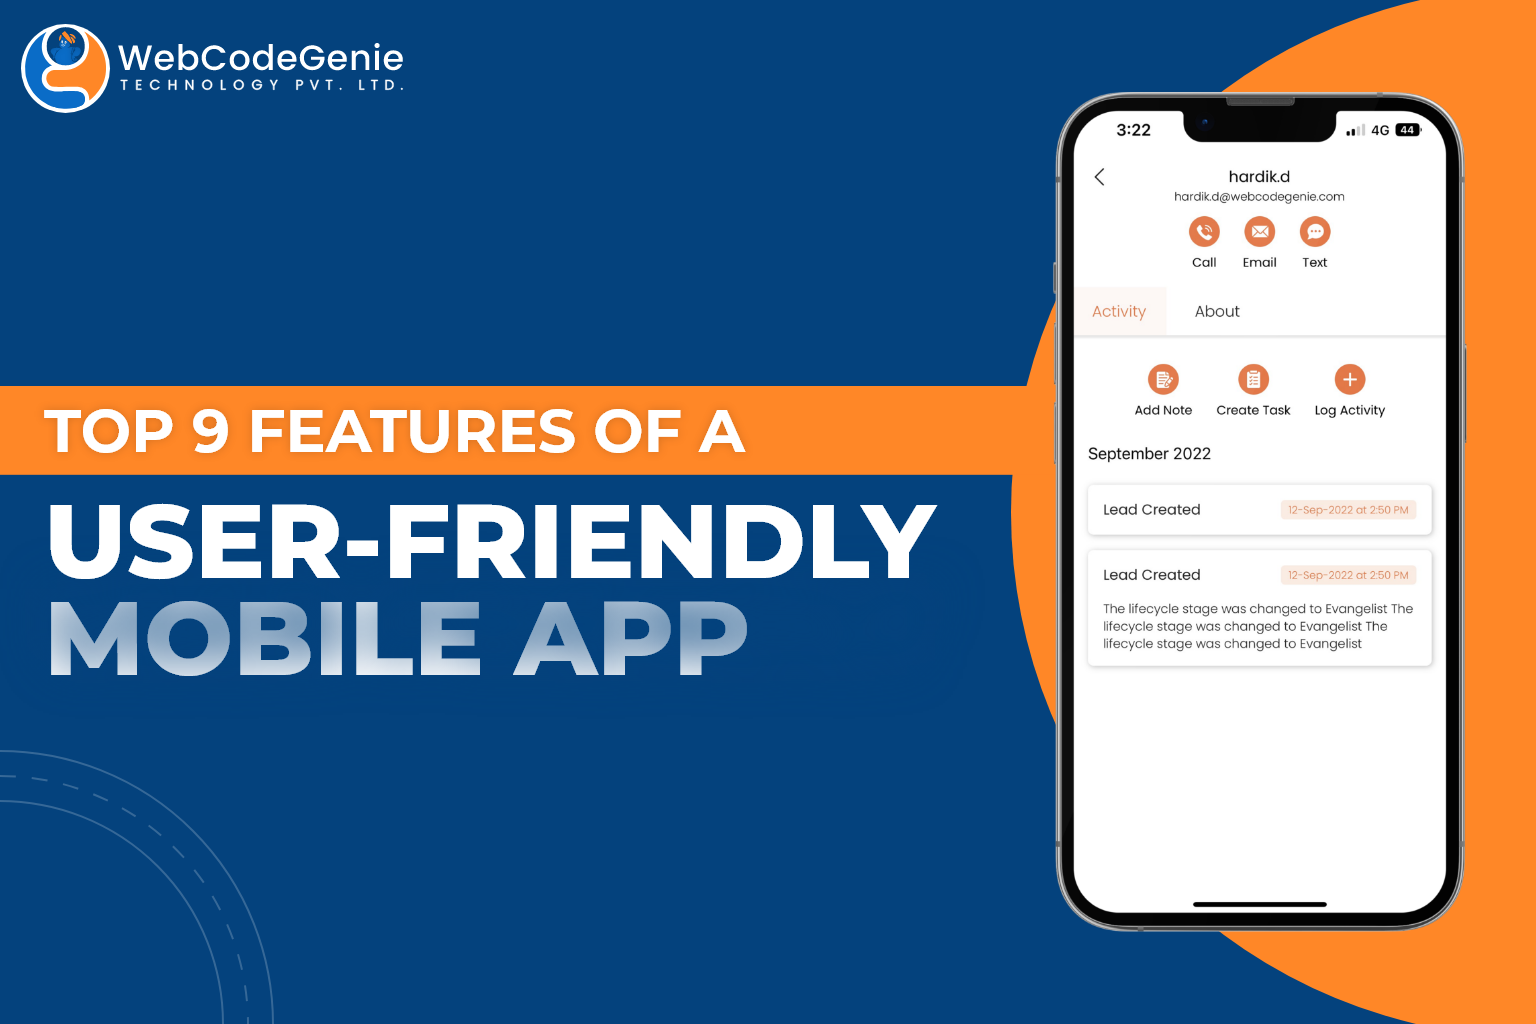 Features of a User-friendly Mobile App